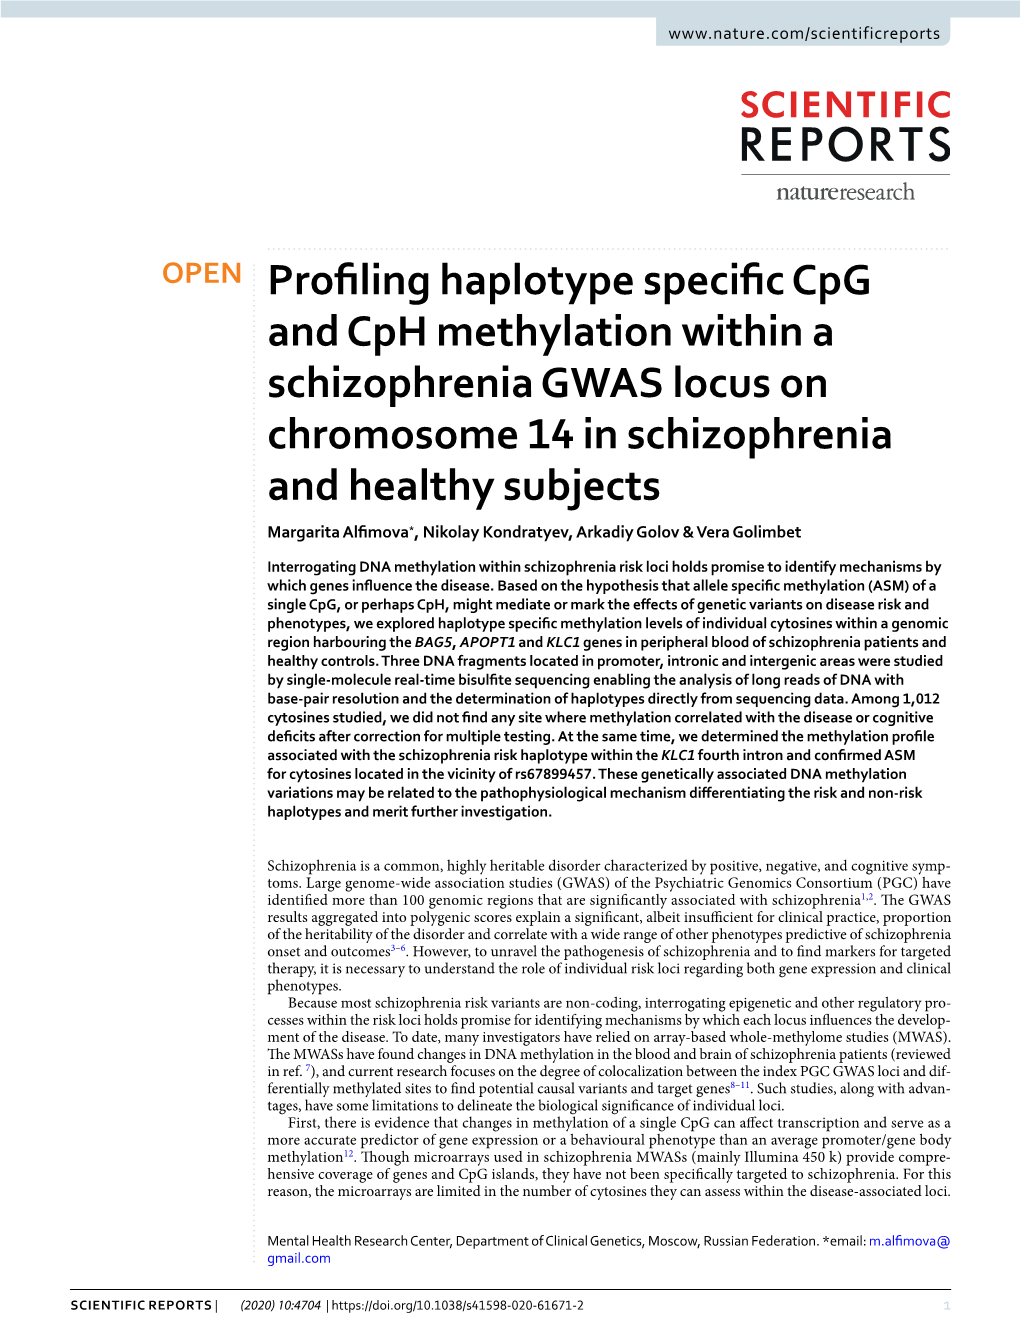 Profiling Haplotype Specific Cpg and Cph Methylation Within A